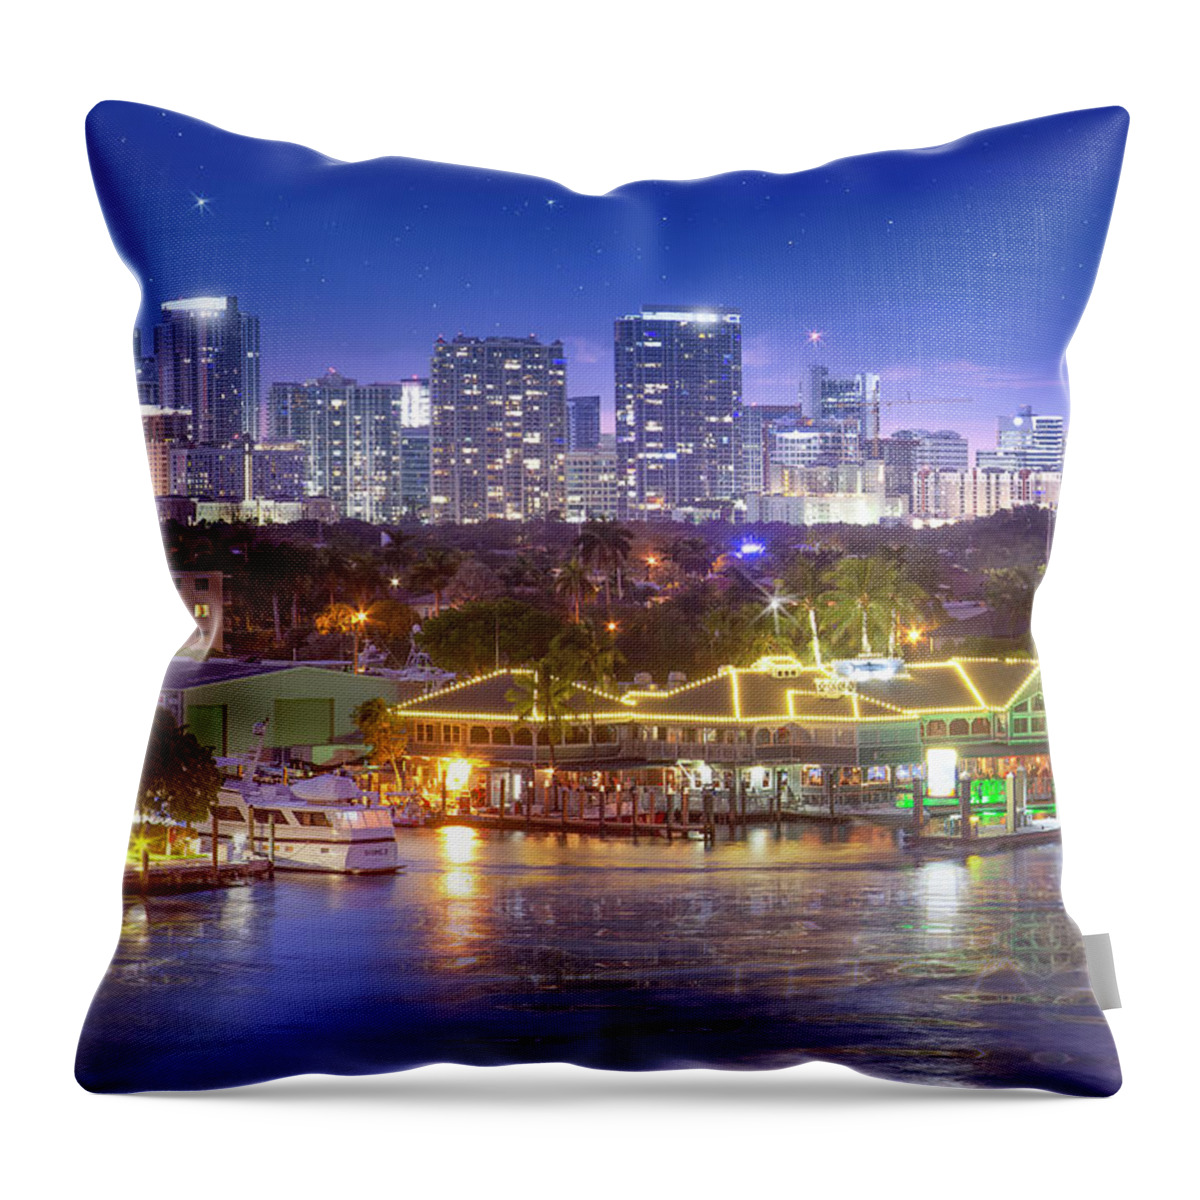 Fort Lauderdale Throw Pillow featuring the photograph Moon Over Fort Lauderdale by Mark Andrew Thomas